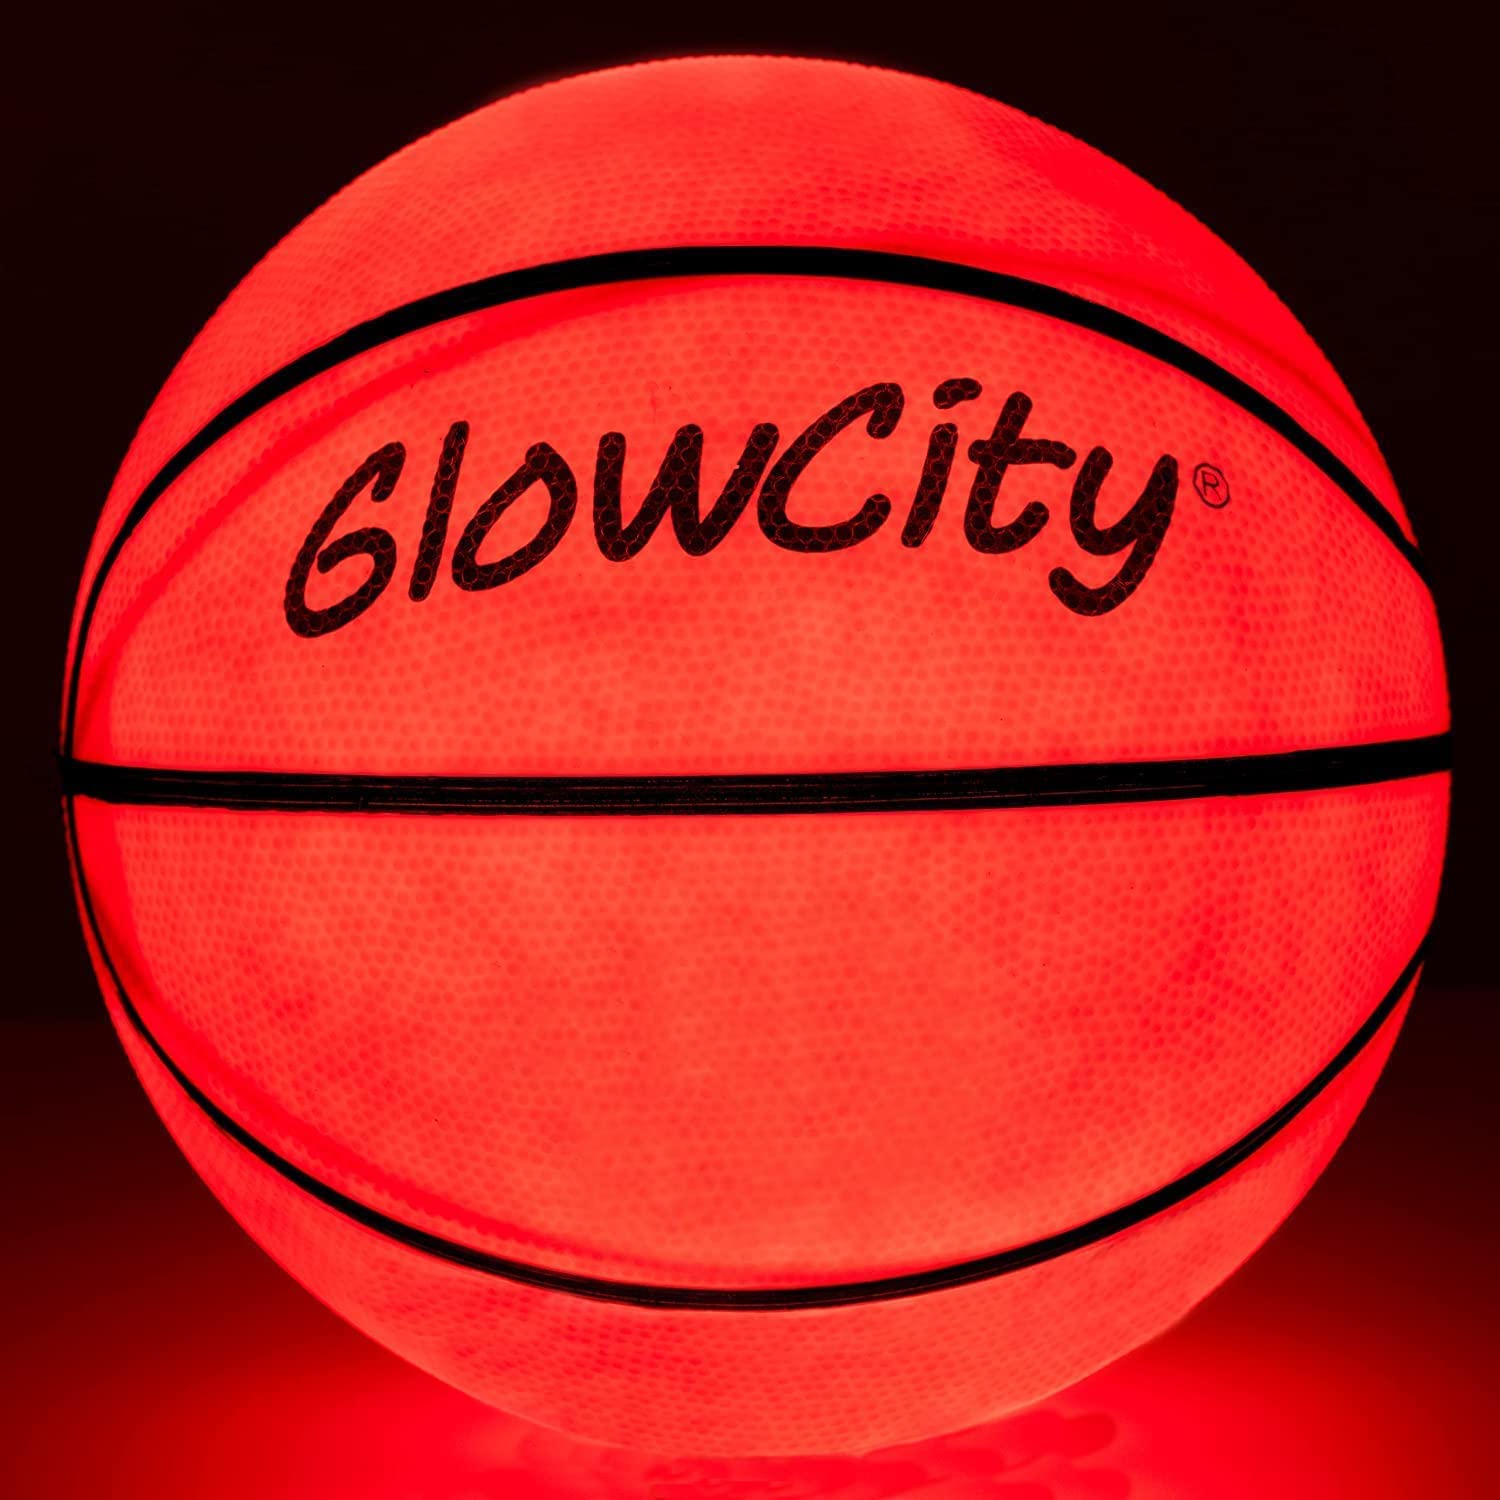 GlowCity Glow in The Dark Basketball - Light Up, Youth Size Basketballs with 2 LED Lights and Pre-Installed Batteries - Gift Ideas for Teen Boys and Girls﻿